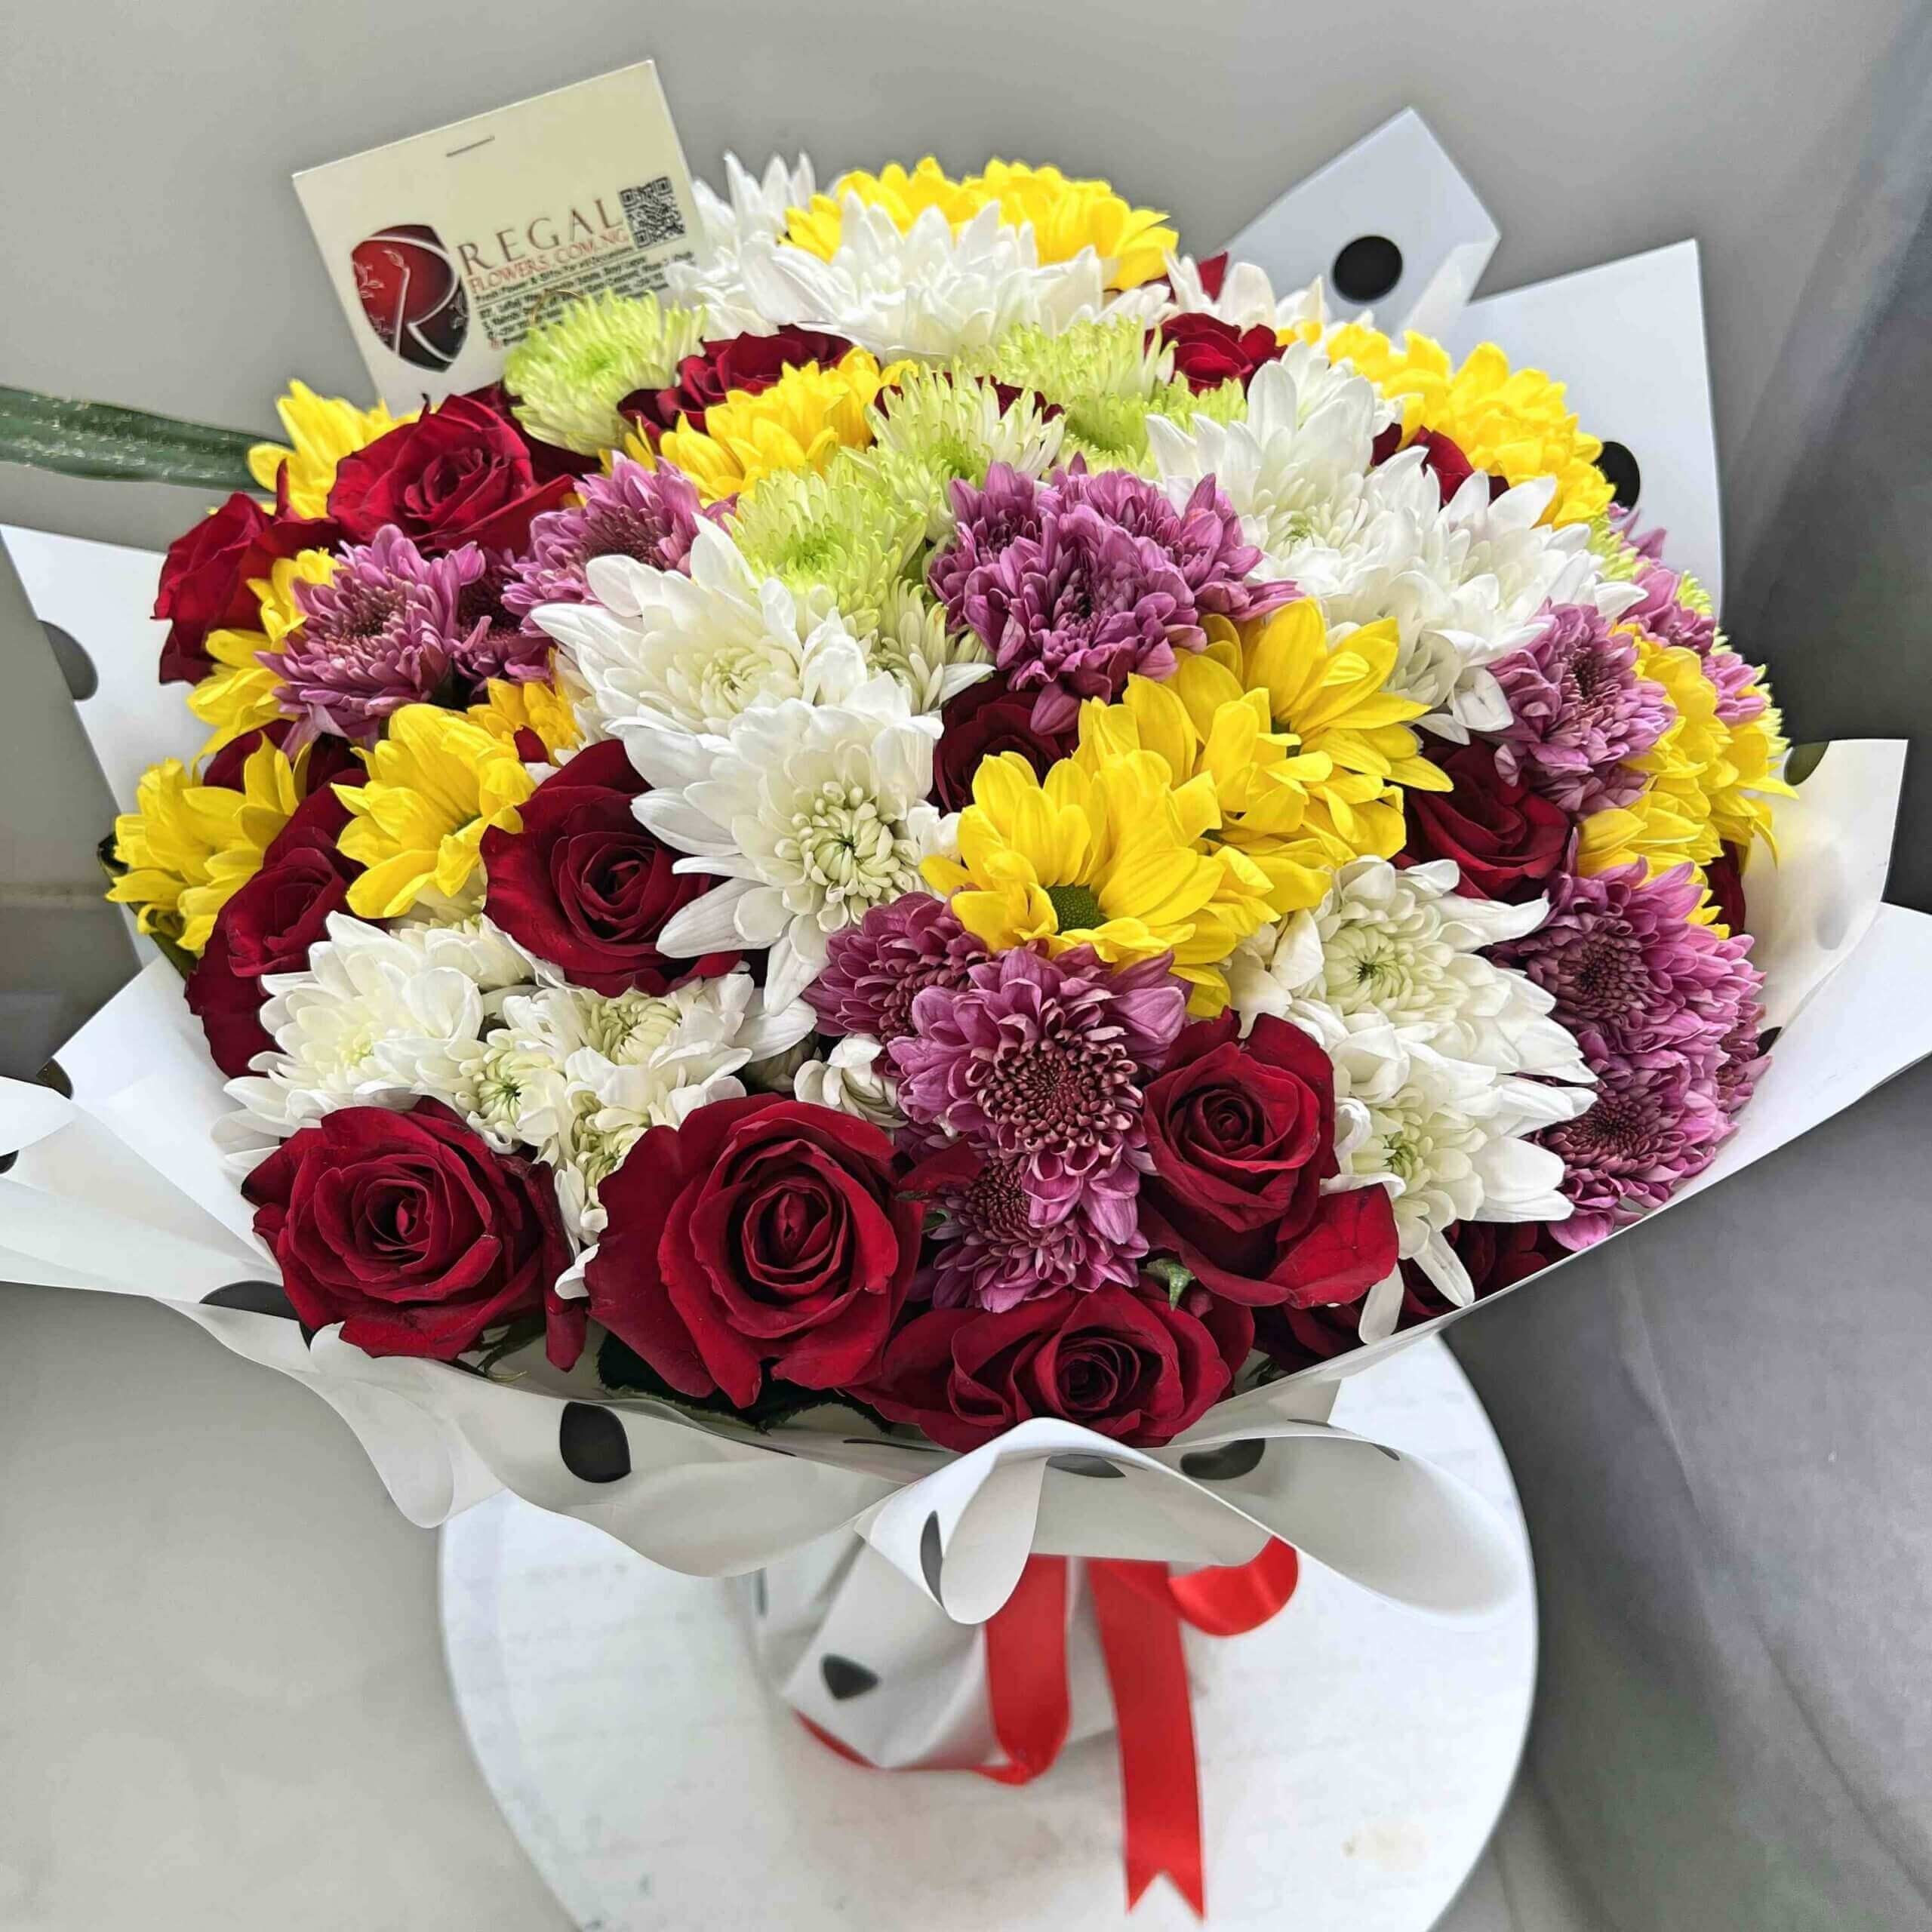 Regal Red roses and white chrysanthemus and Lilac Chrysanthemums_11zon